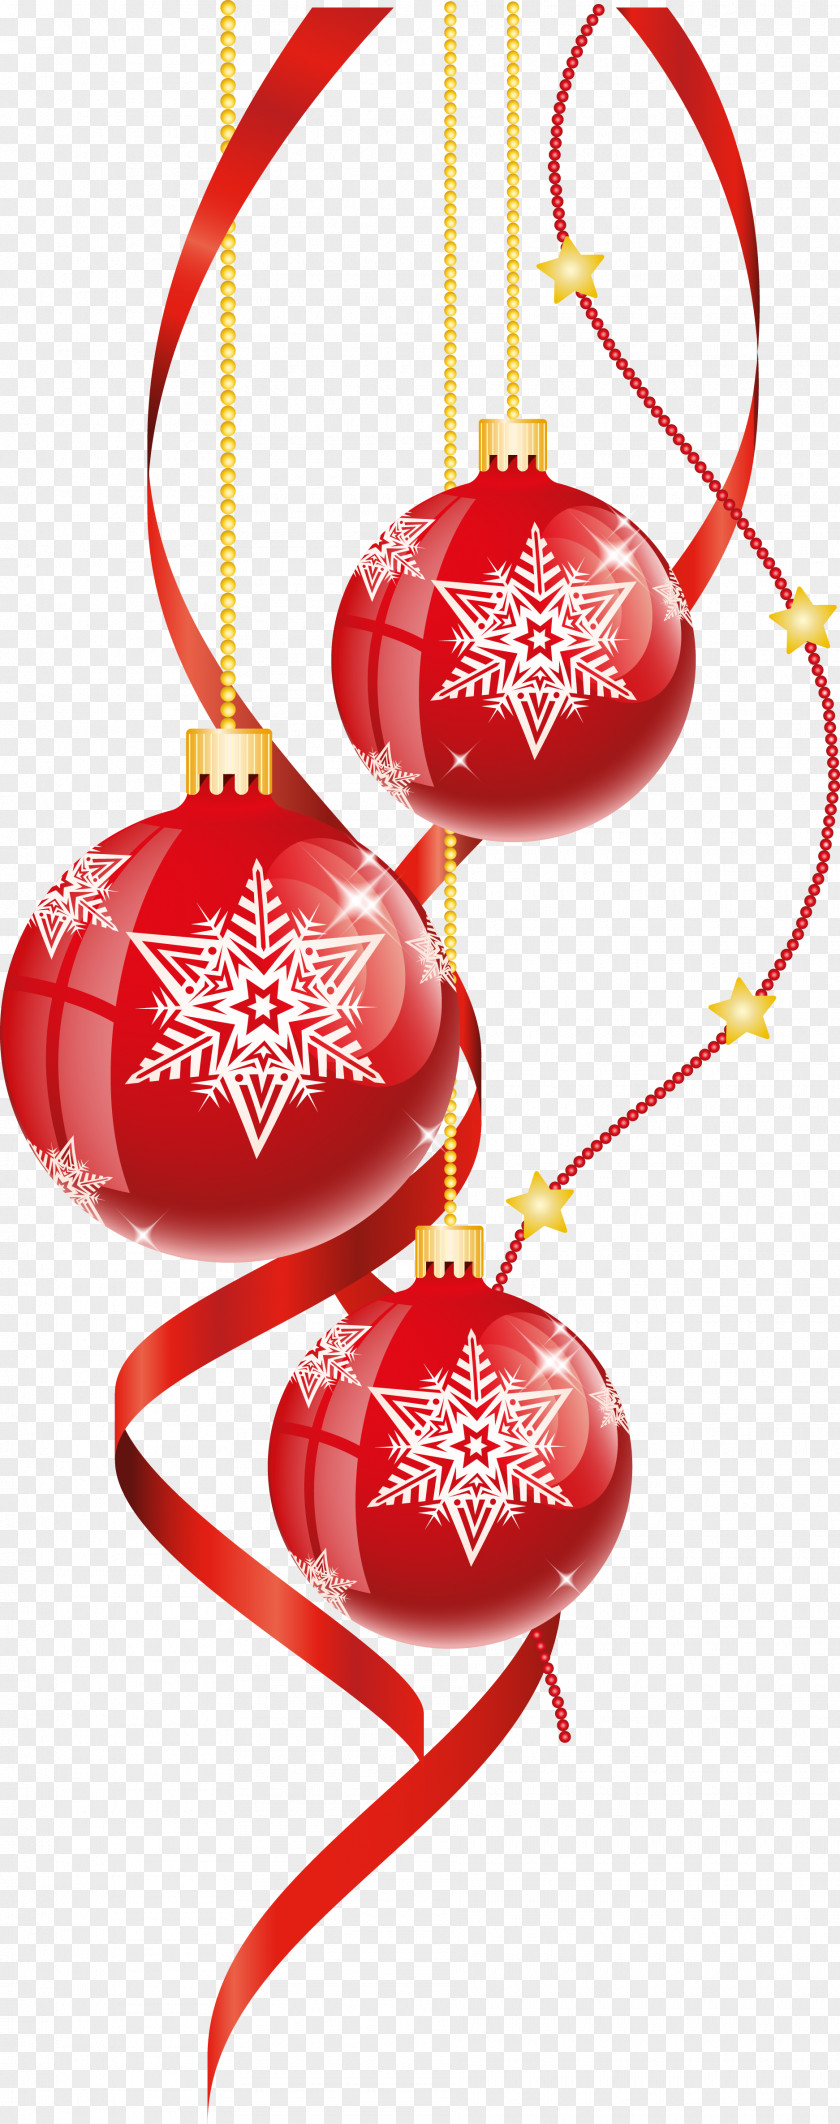 Merrychristmas Christmas Decoration Card Ornament Clip Art PNG